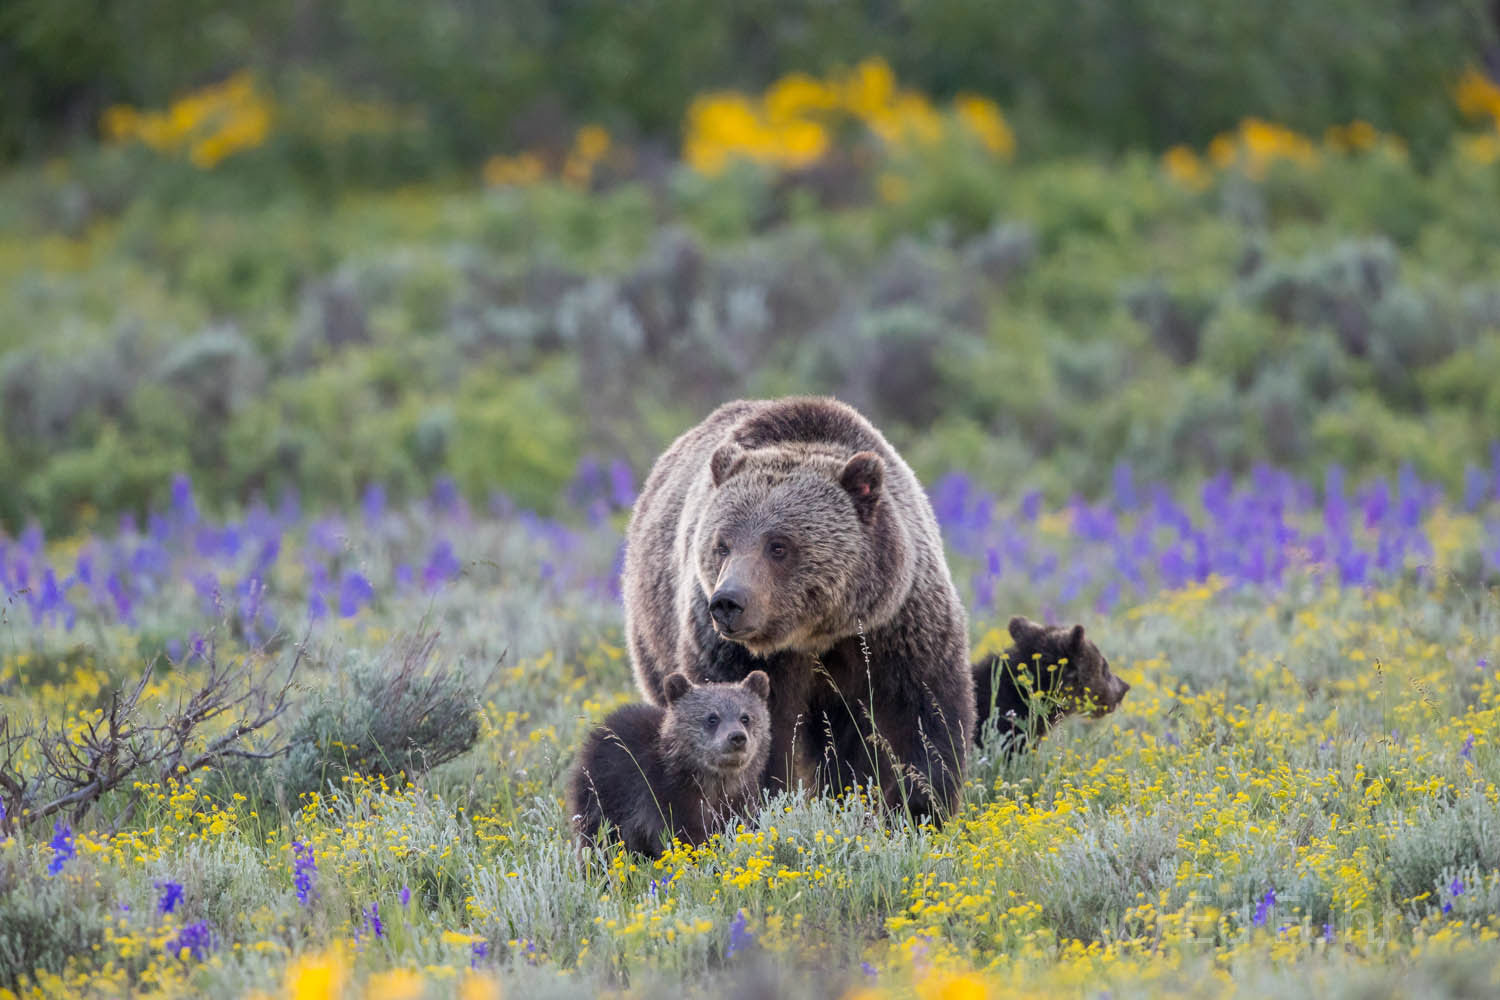 In a meadow of wildflowers grizzly bear Blondie forages in the company of her two young cubs.